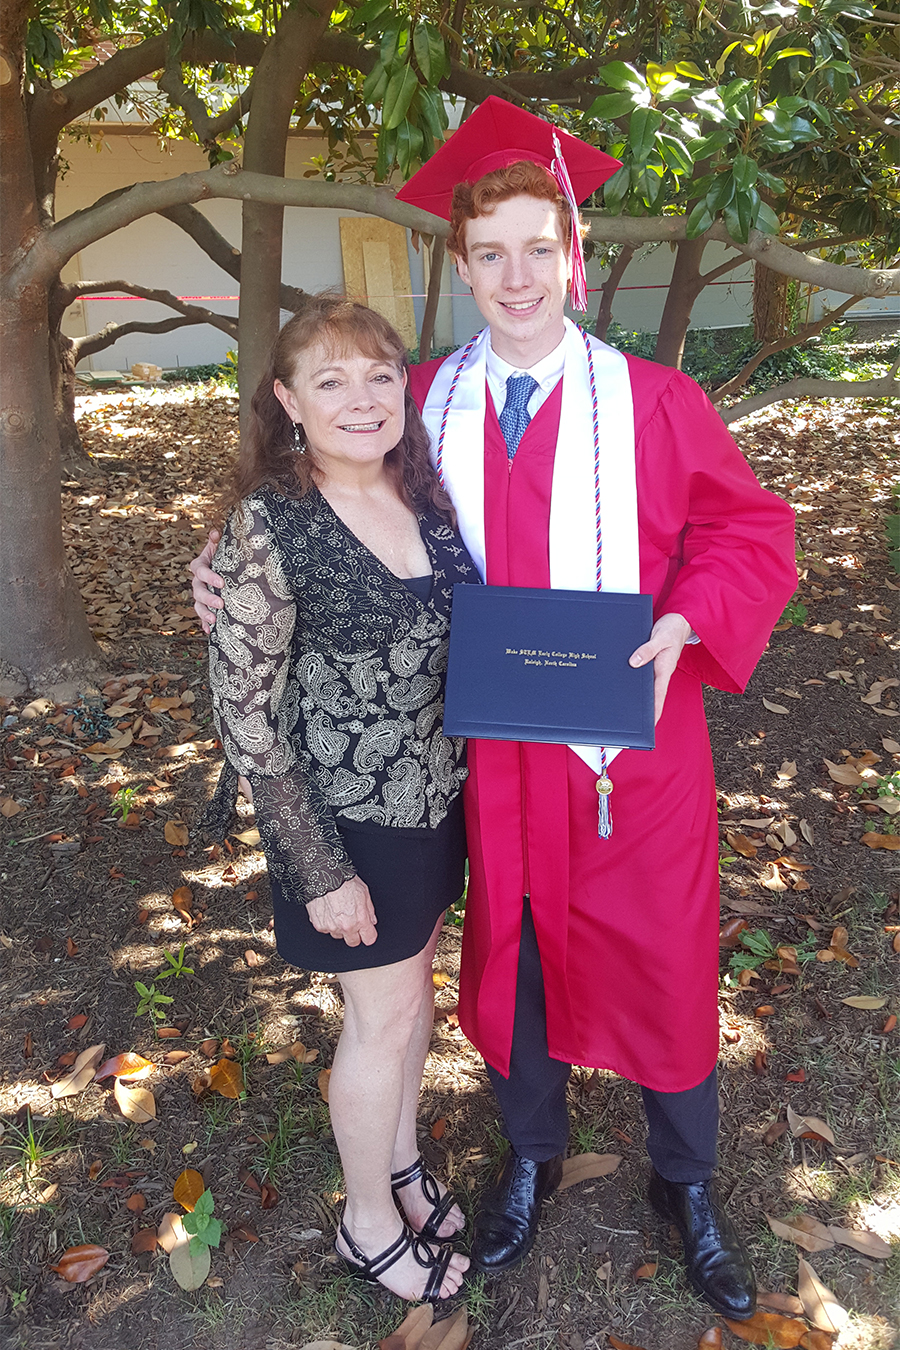 Tyler Gilreath stands next to his mother, Tamra, wearing a red cap and gown for his high school graduation, holding his diploma. His mother stands next to him on the left wearing a black patterned dress. They are standing outdoors and the weather is sunny.